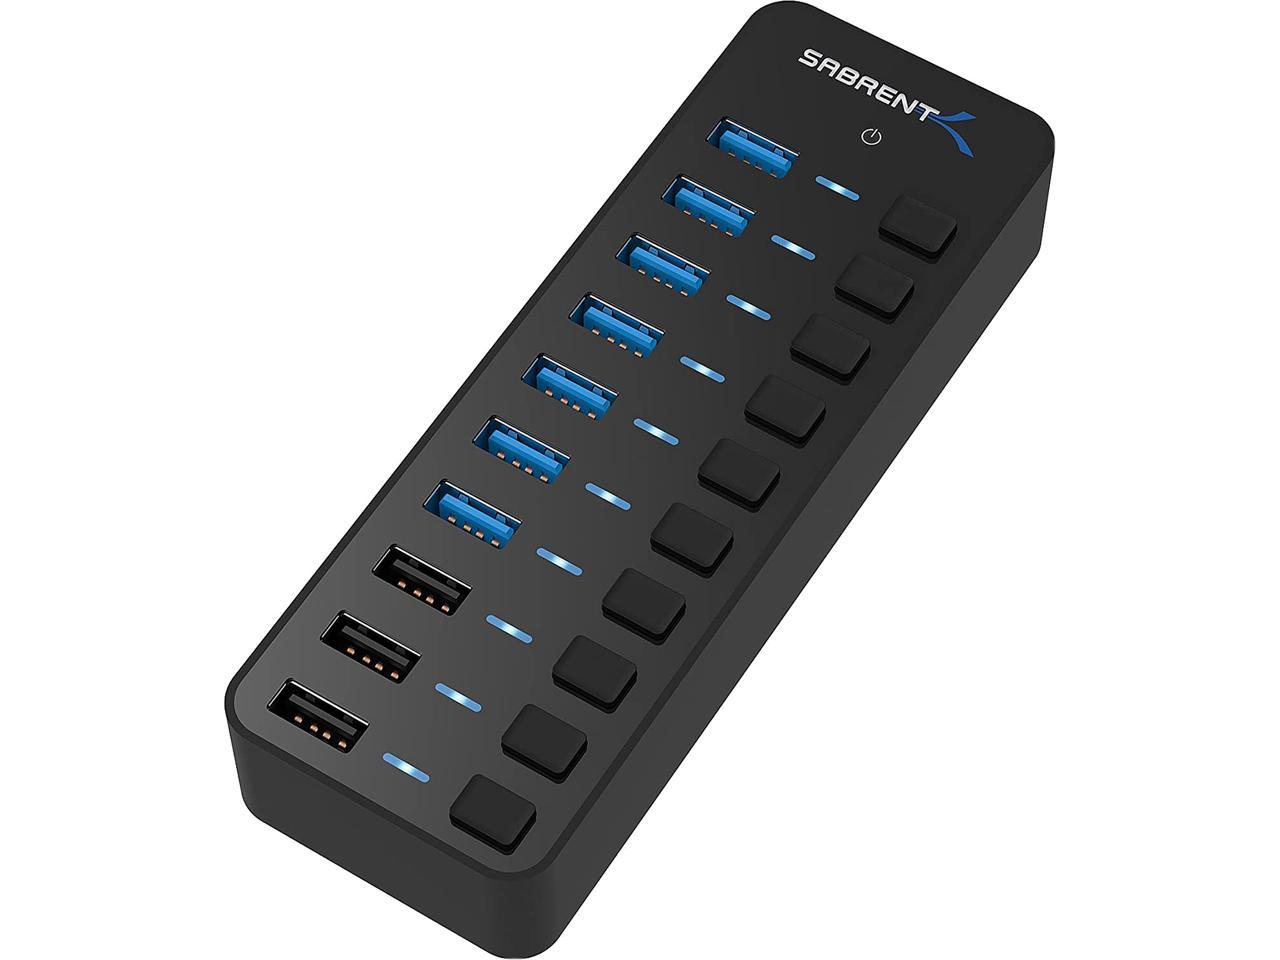 Sabrent 60w 10 Port Usb 3 0 Hub Includes 3 Smart Charging Ports With